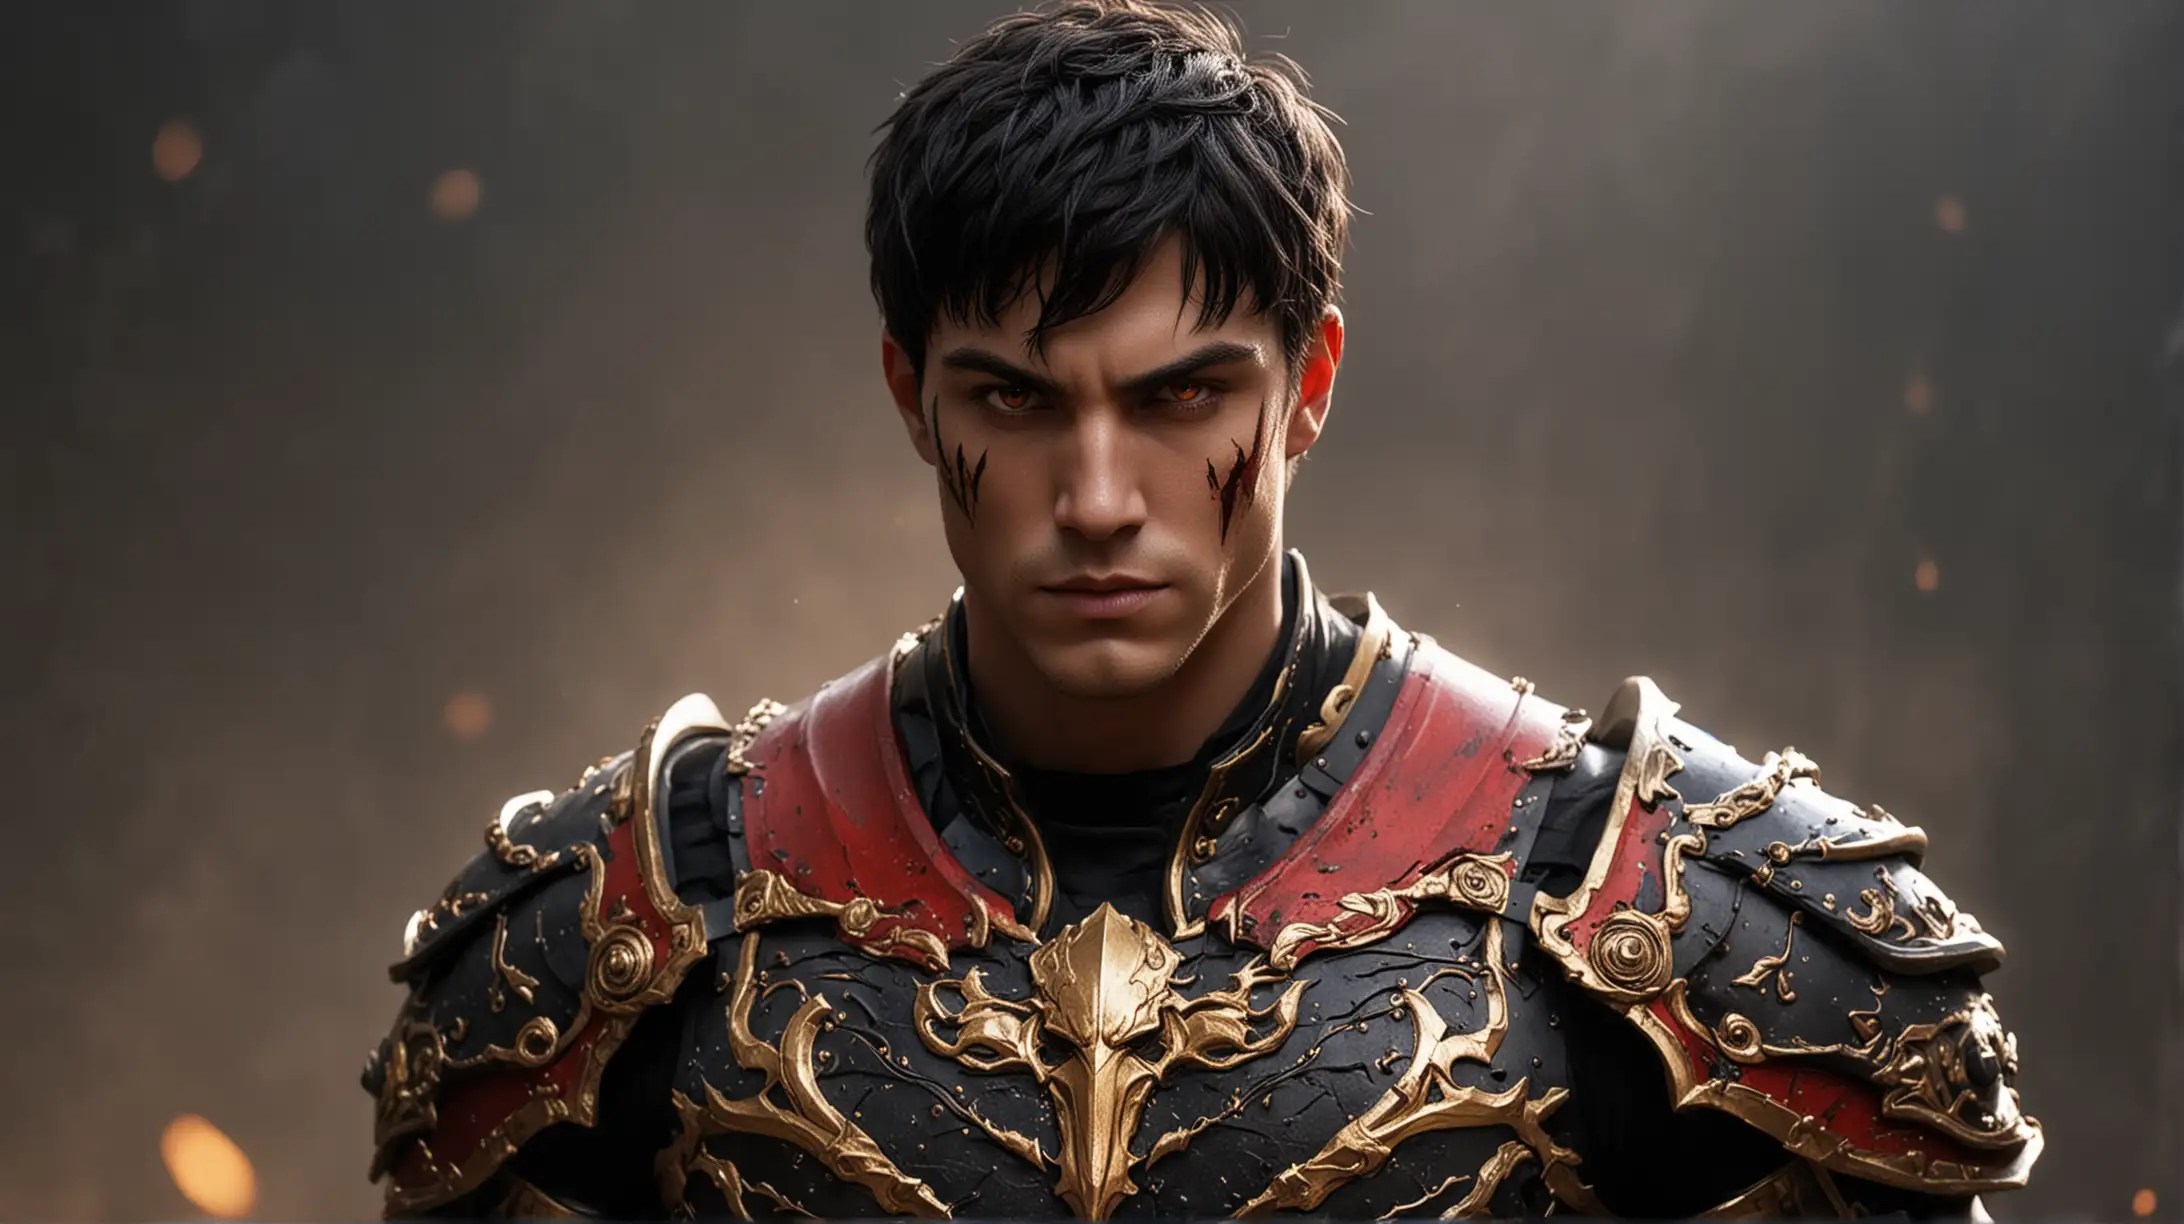 A beautiful man wearing red and black armor, has muscles, with short dark hair, gold glowing eyes